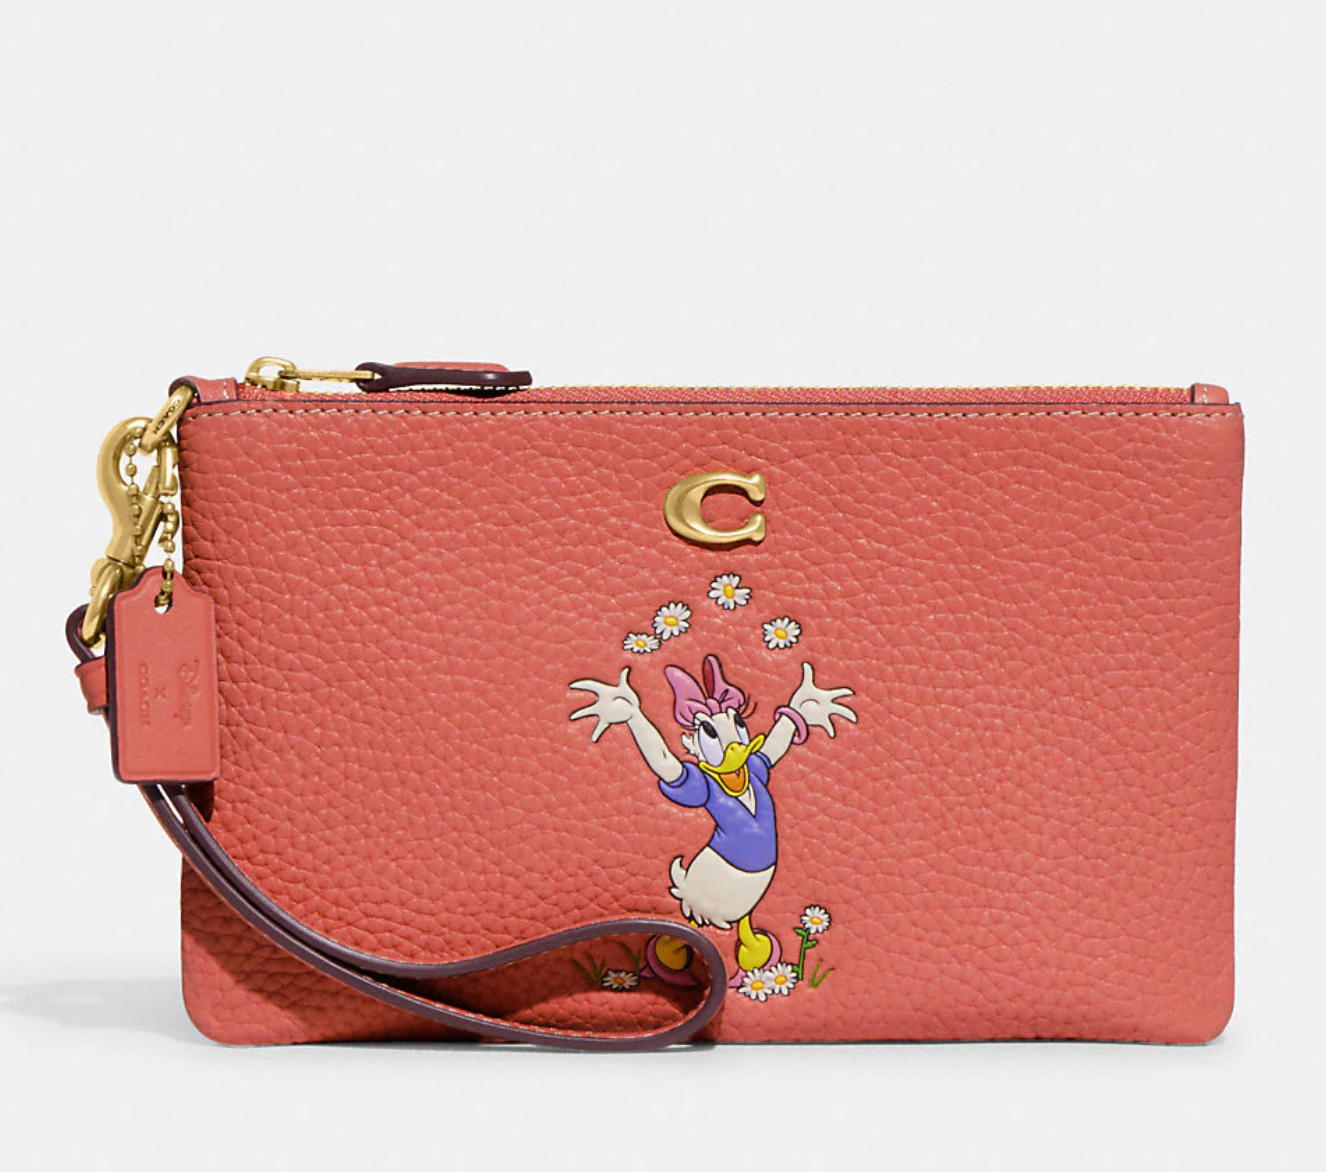 The Coach x Disney Collection Has Mickey Mouse-Shaped Bags